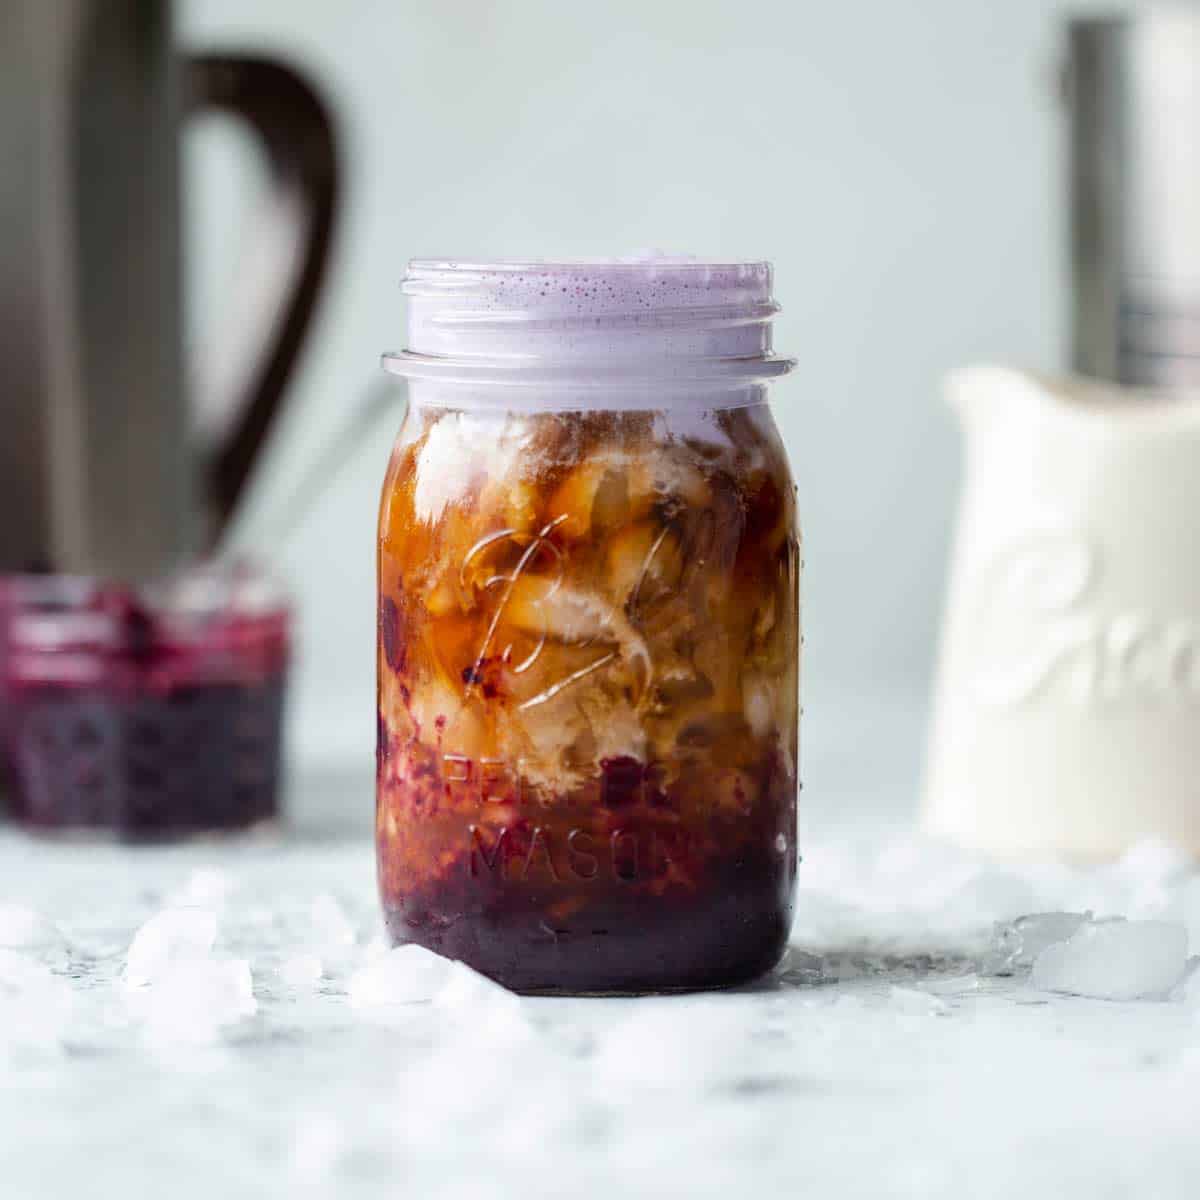 Blueberry coffee in a mason jar with purple blueberry cold foam on the top and cream, blueberry puree and coffee visible in the background.